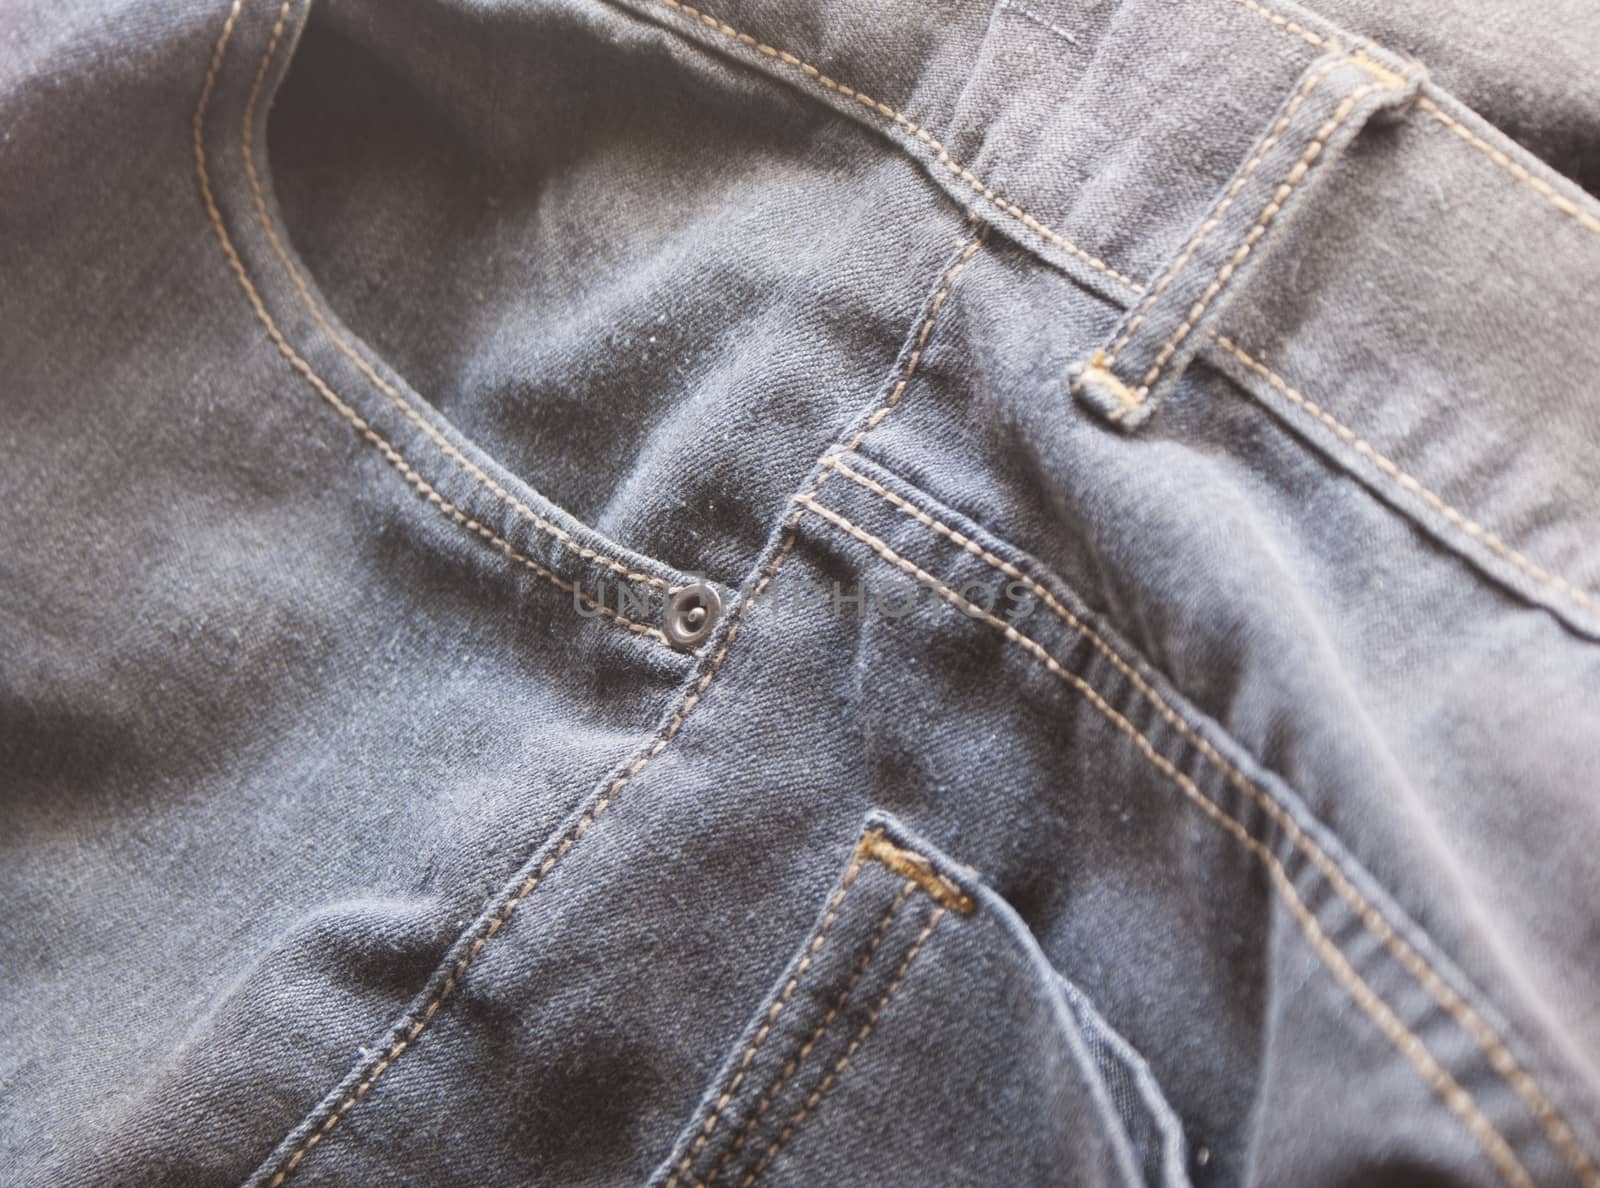 Photograph of a pair of jeans texture